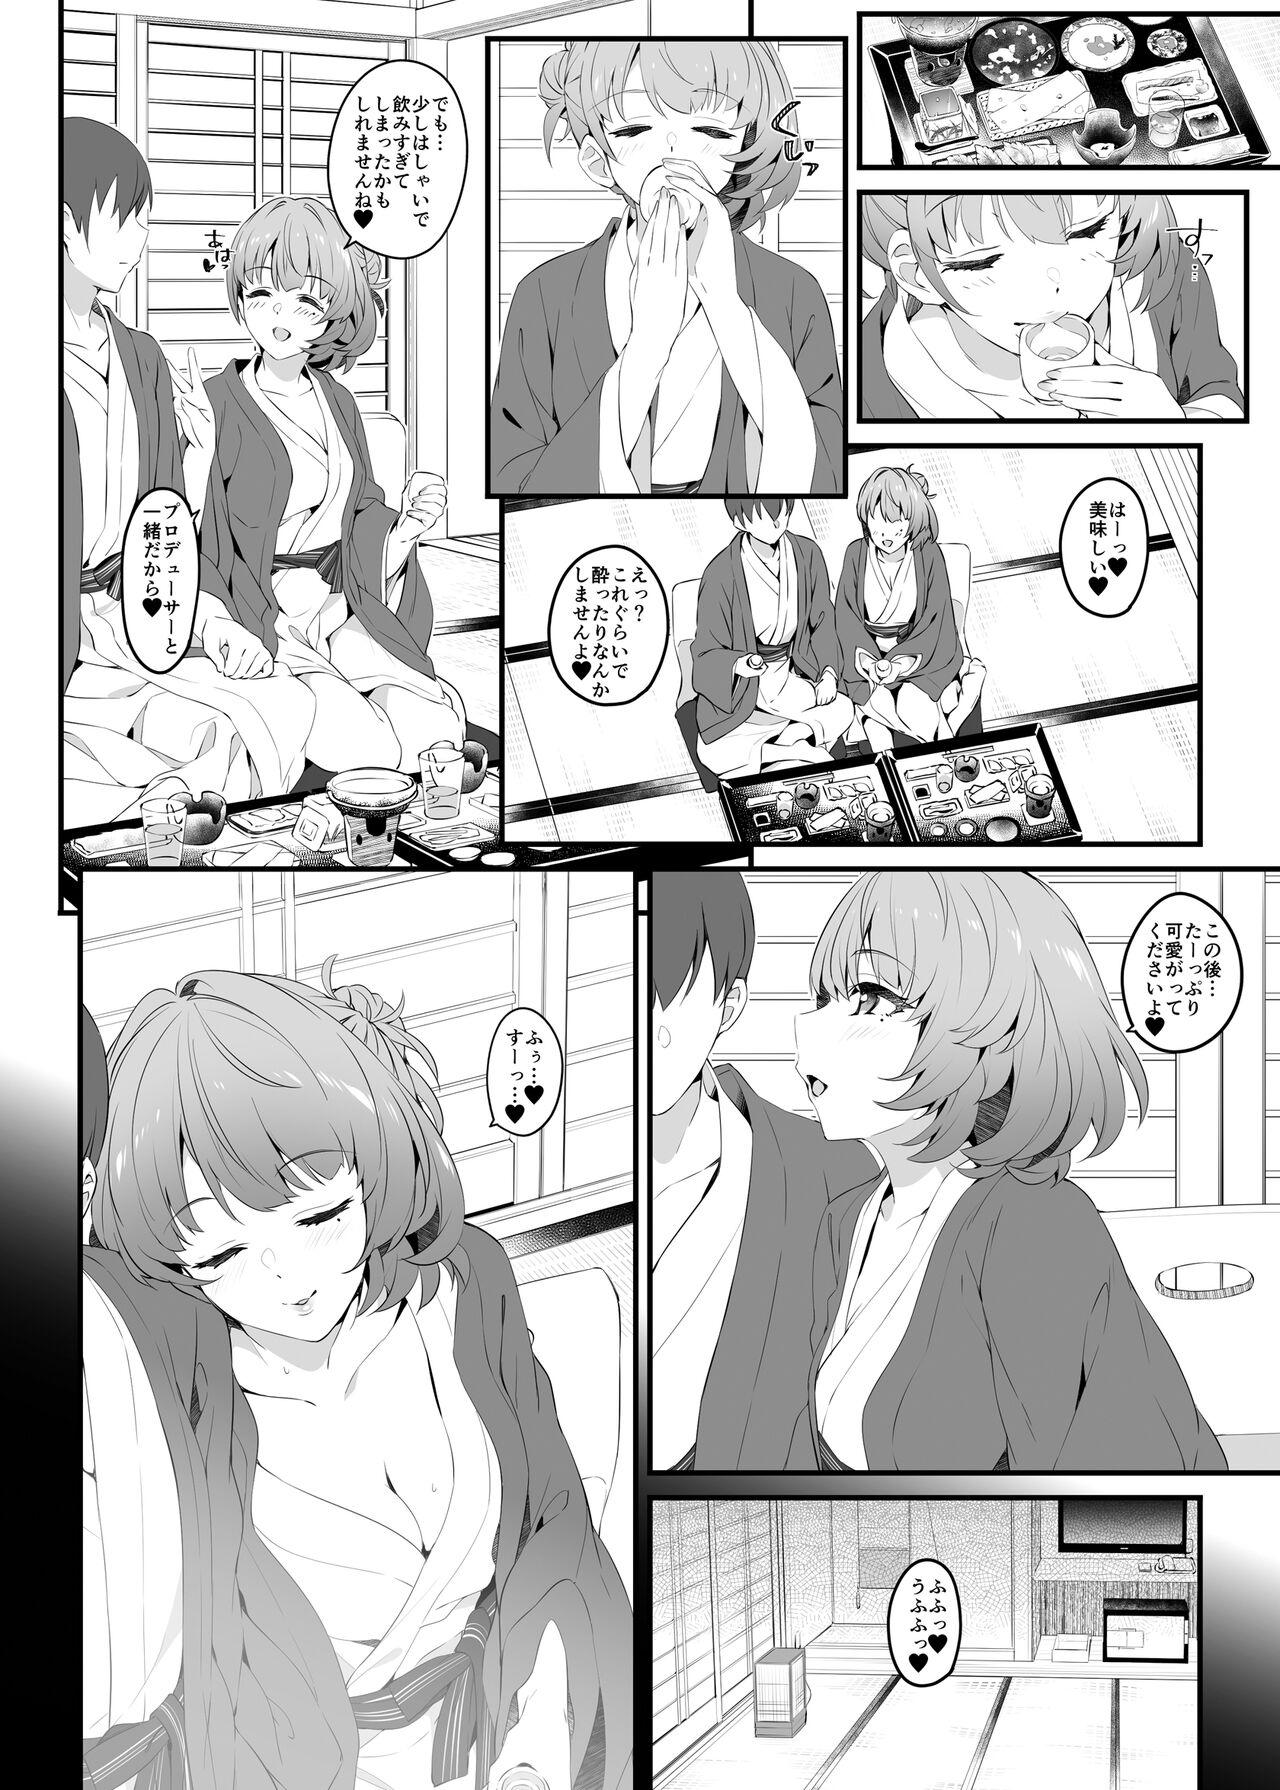 Hymen Flowers blooming at night and the kings in the dream. - The idolmaster Skinny - Page 8